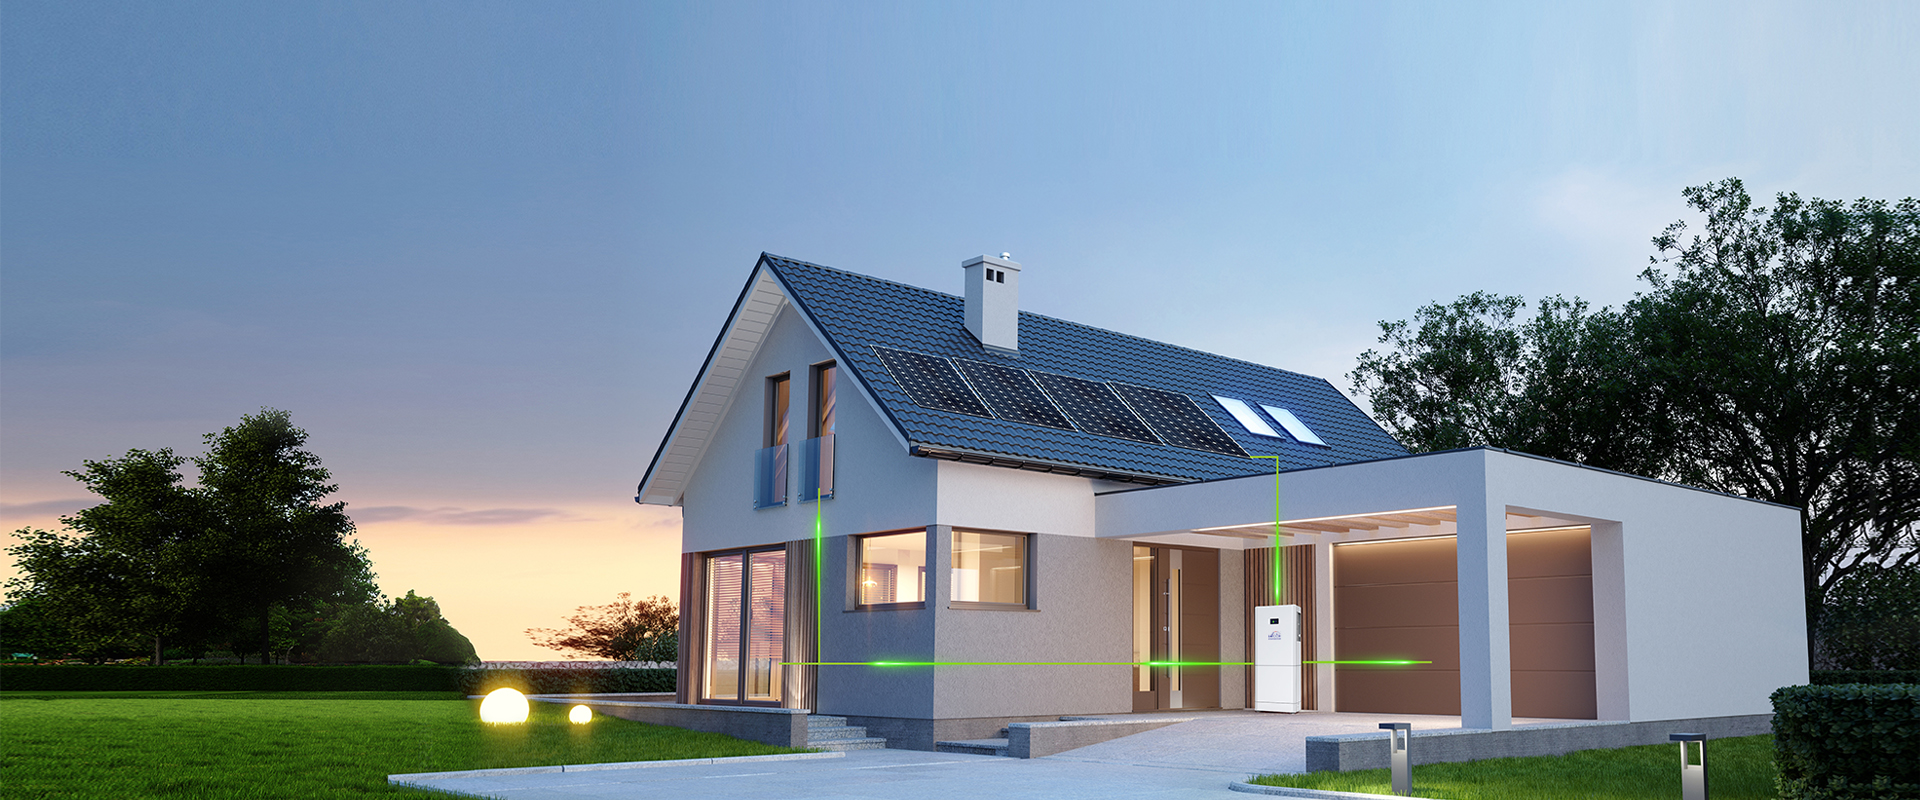 MAKING A POWER-SELF-SUFFICIENT HOME